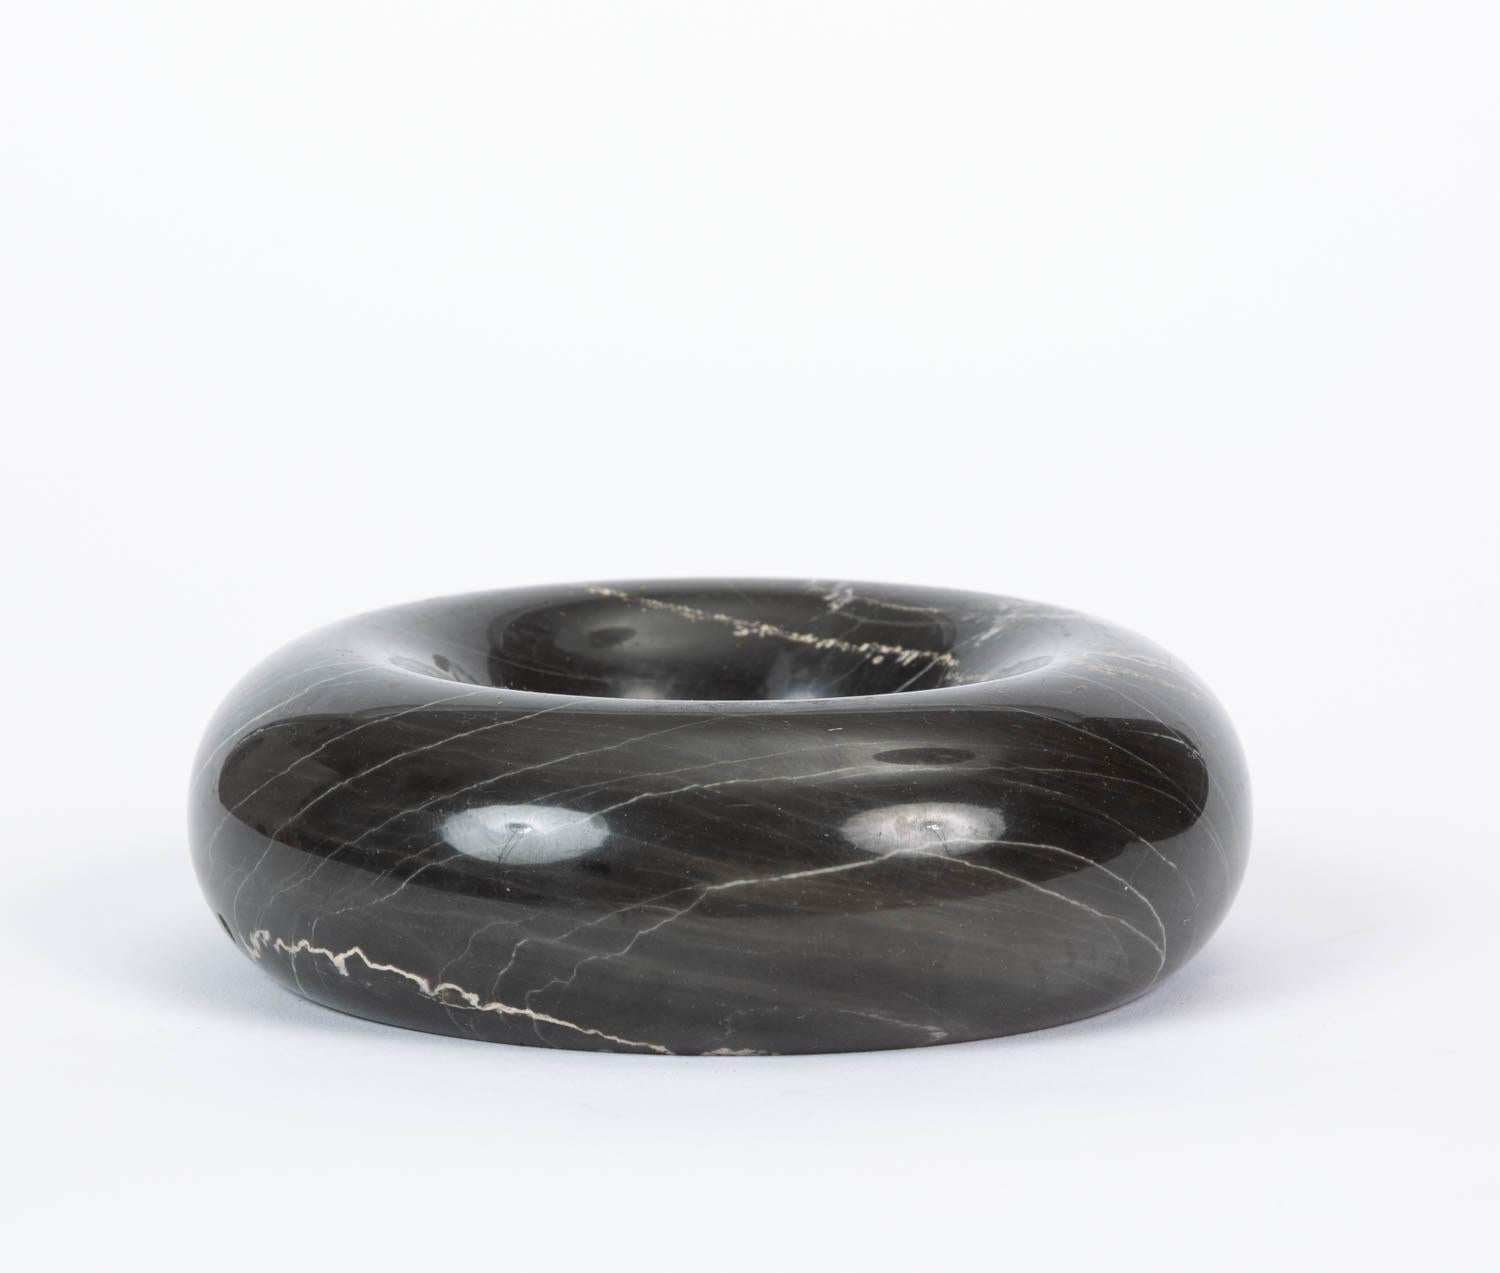 Sergio Asti Marble Art Bowl for Up & Up 1